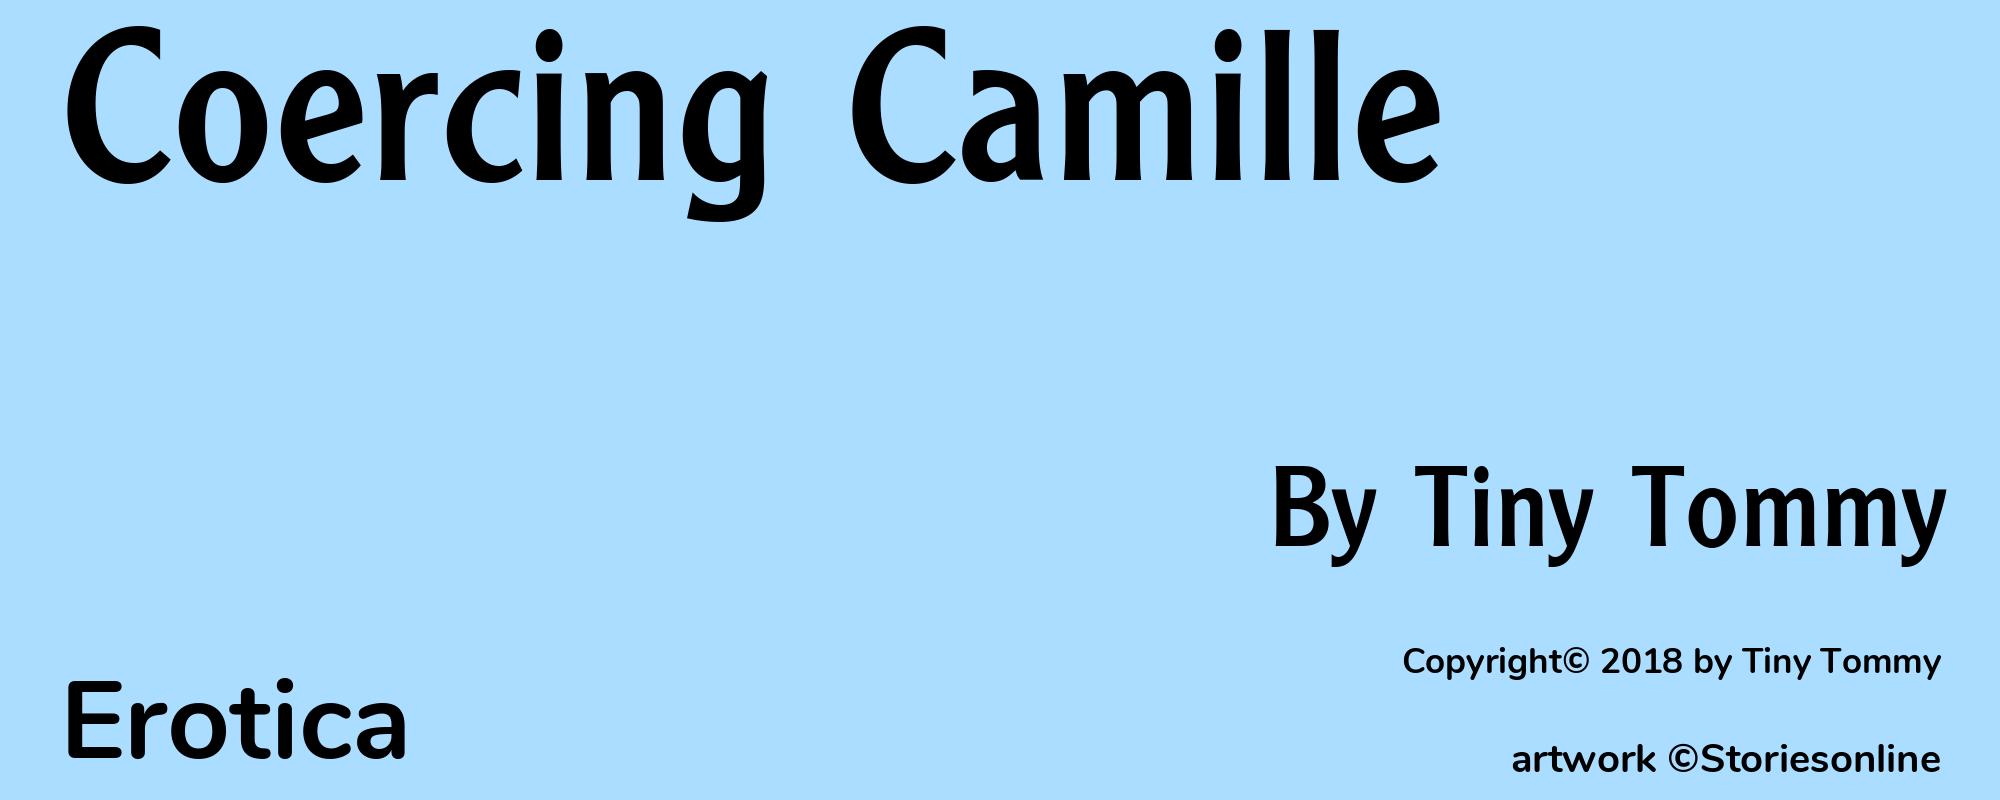 Coercing Camille - Cover